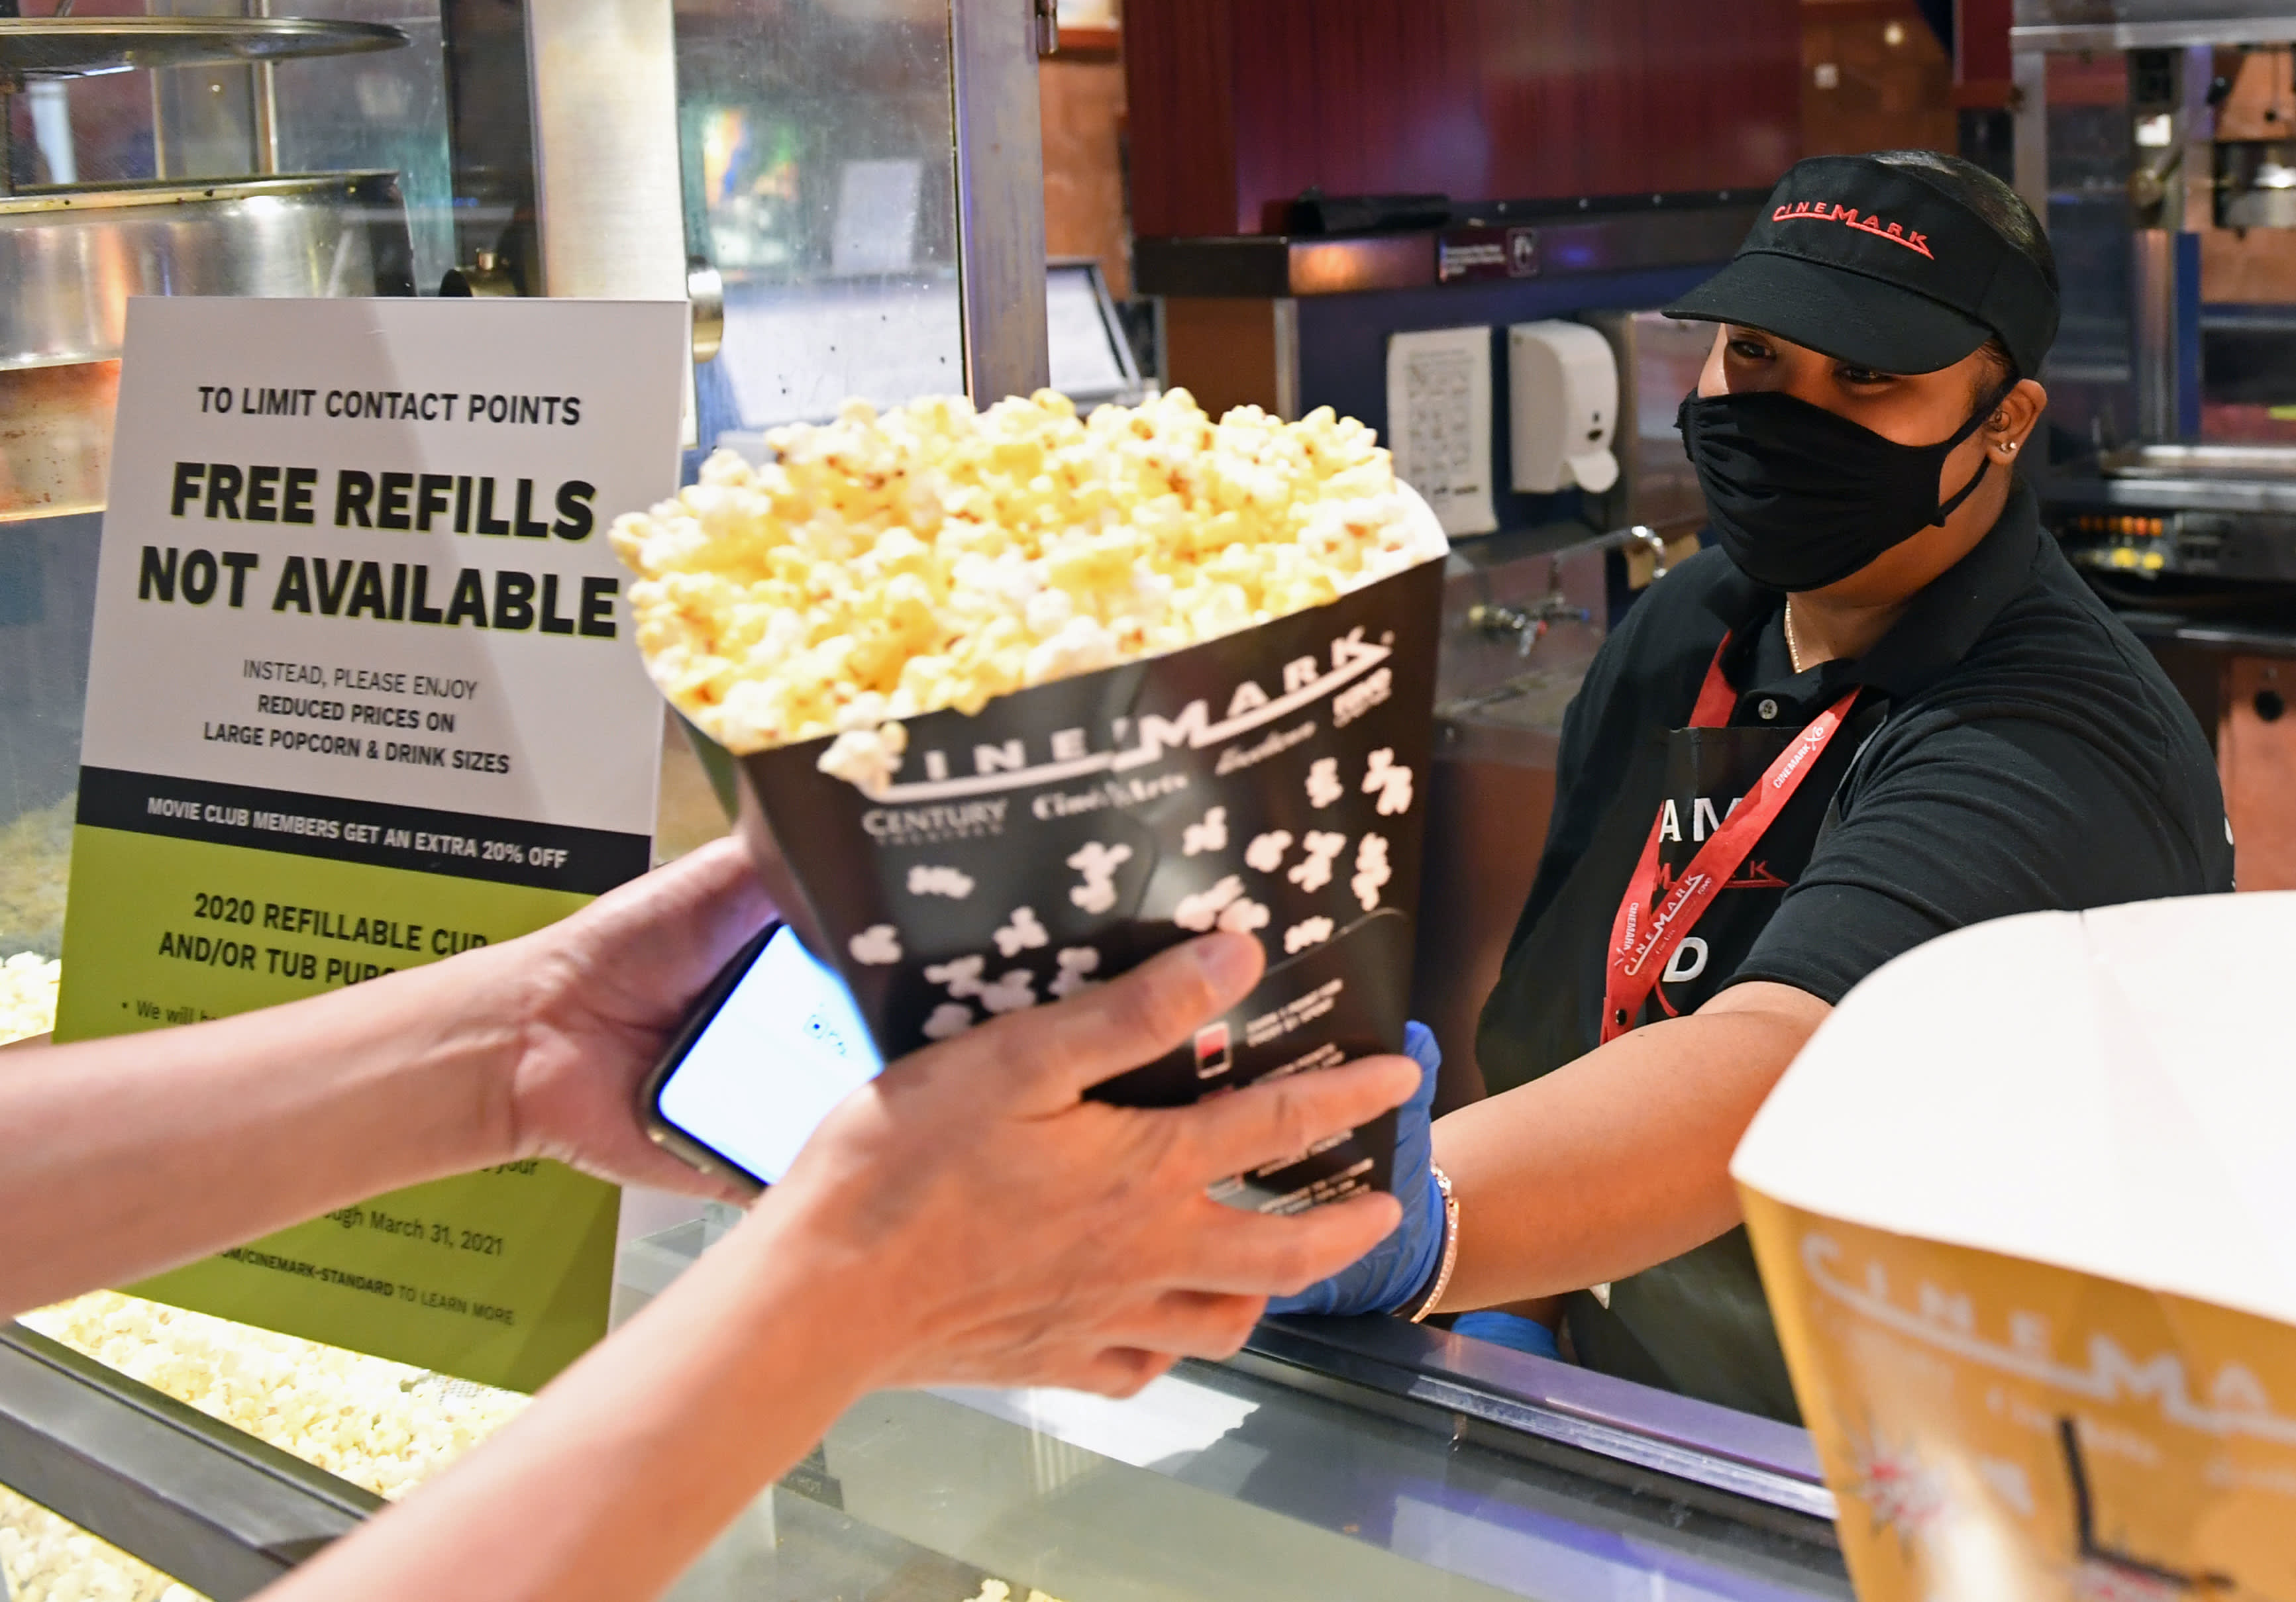 New popcorn business won't change the rules of the game for AMC